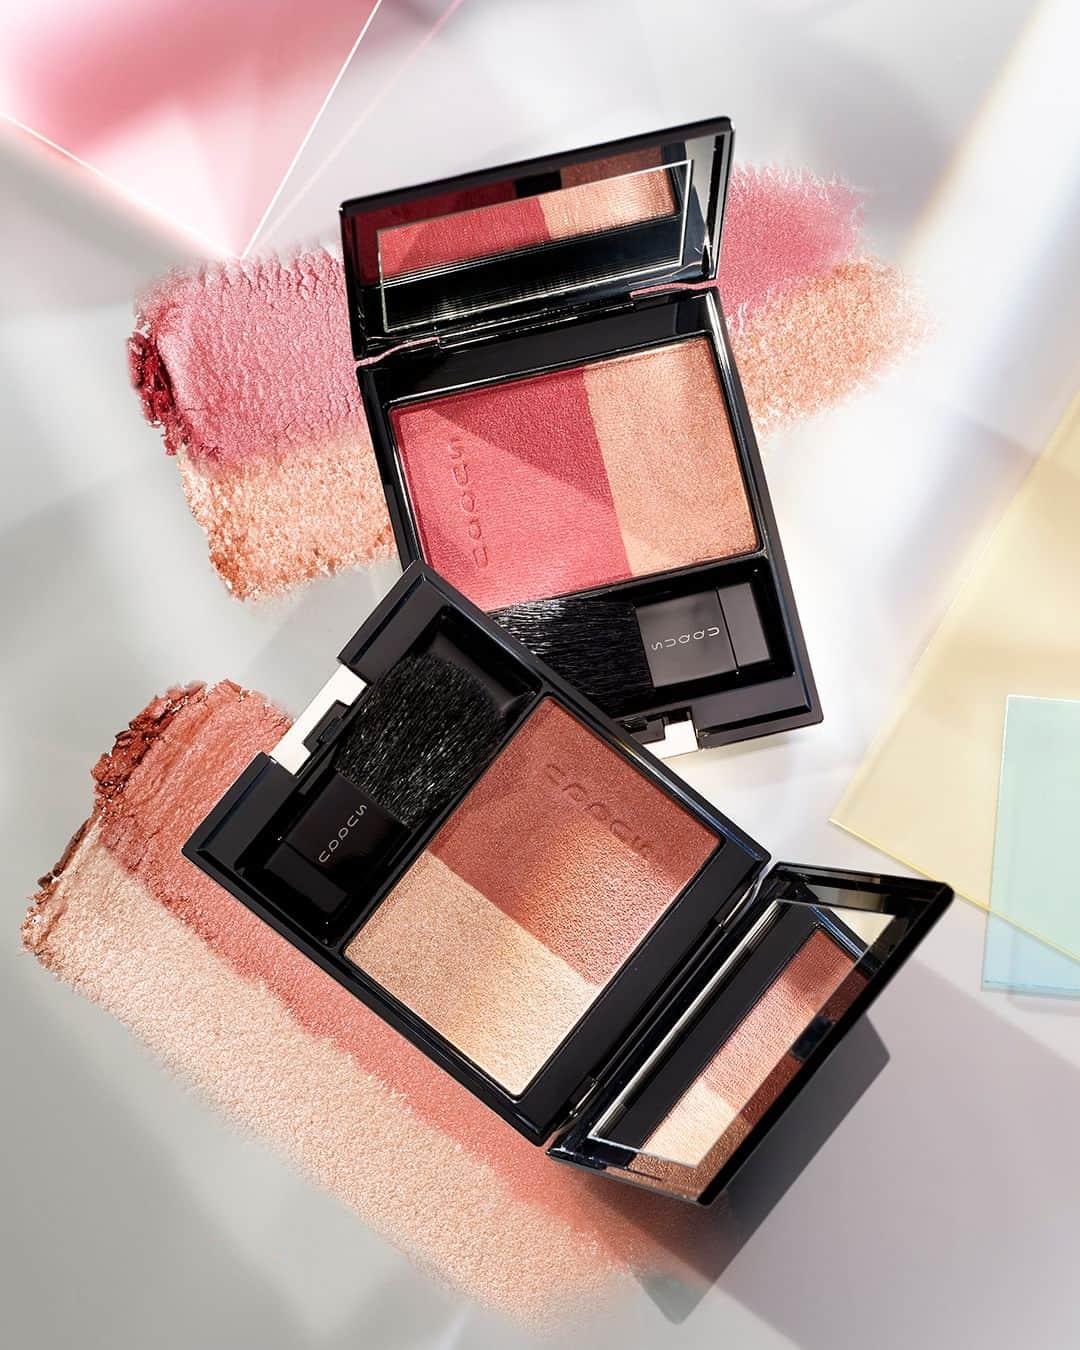 SUQQU公式Instgramアカウントのインスタグラム：「Adorn the cheeks with shimmer as you desire, with blush and highlighting colors in different textures. They can be blended in the desired balance or used separately.  PURE COLOR BLUSH 144 -HAYAZAKIIRO [Limited color]  145 -BYOUTOU [Limited color]   質感の異なるチーク＆ハイライトで輝きを自在に纏い、頬を染め上げる。 好みのバランスでブレンドさせても、それぞれに使い分けても。  ピュア カラー ブラッシュ 144 早咲色 -HAYAZAKIIRO [限定色]  145 杪冬 -BYOUTOU [限定色]  #SUQQU #スック #jbeauty #cosmetics #SUQQU20th #SUQQUcolormakeup #wintercolorcollection #newproducts #holiday #limited #ピュアカラーブラッシュ」